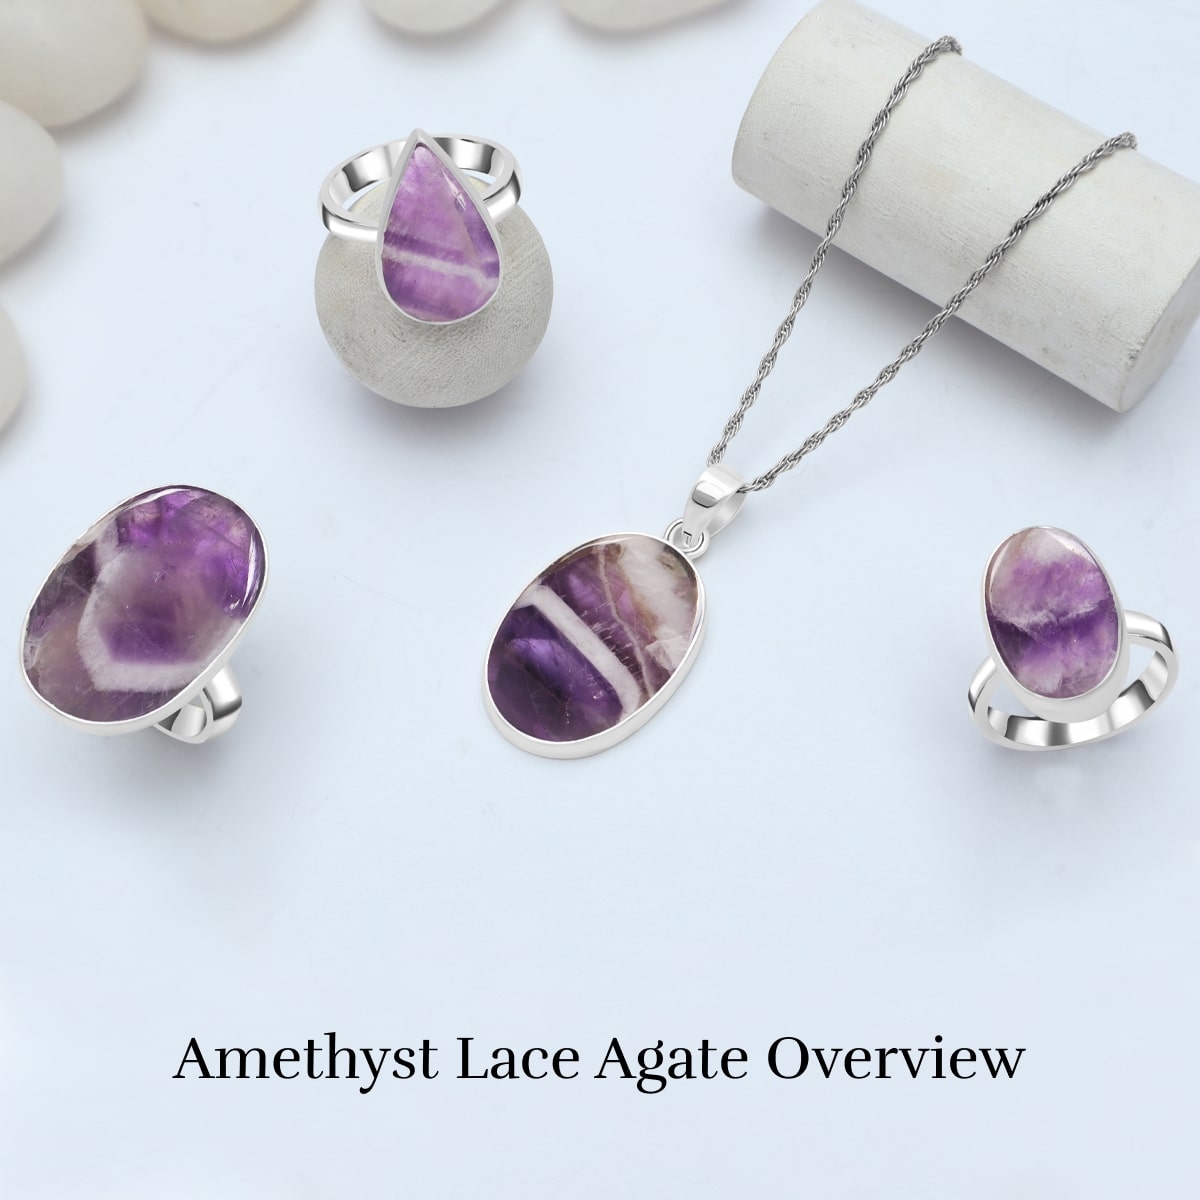 Amethyst Lace Agate - Meaning, History, Healing Properties, Benefits, and Associations